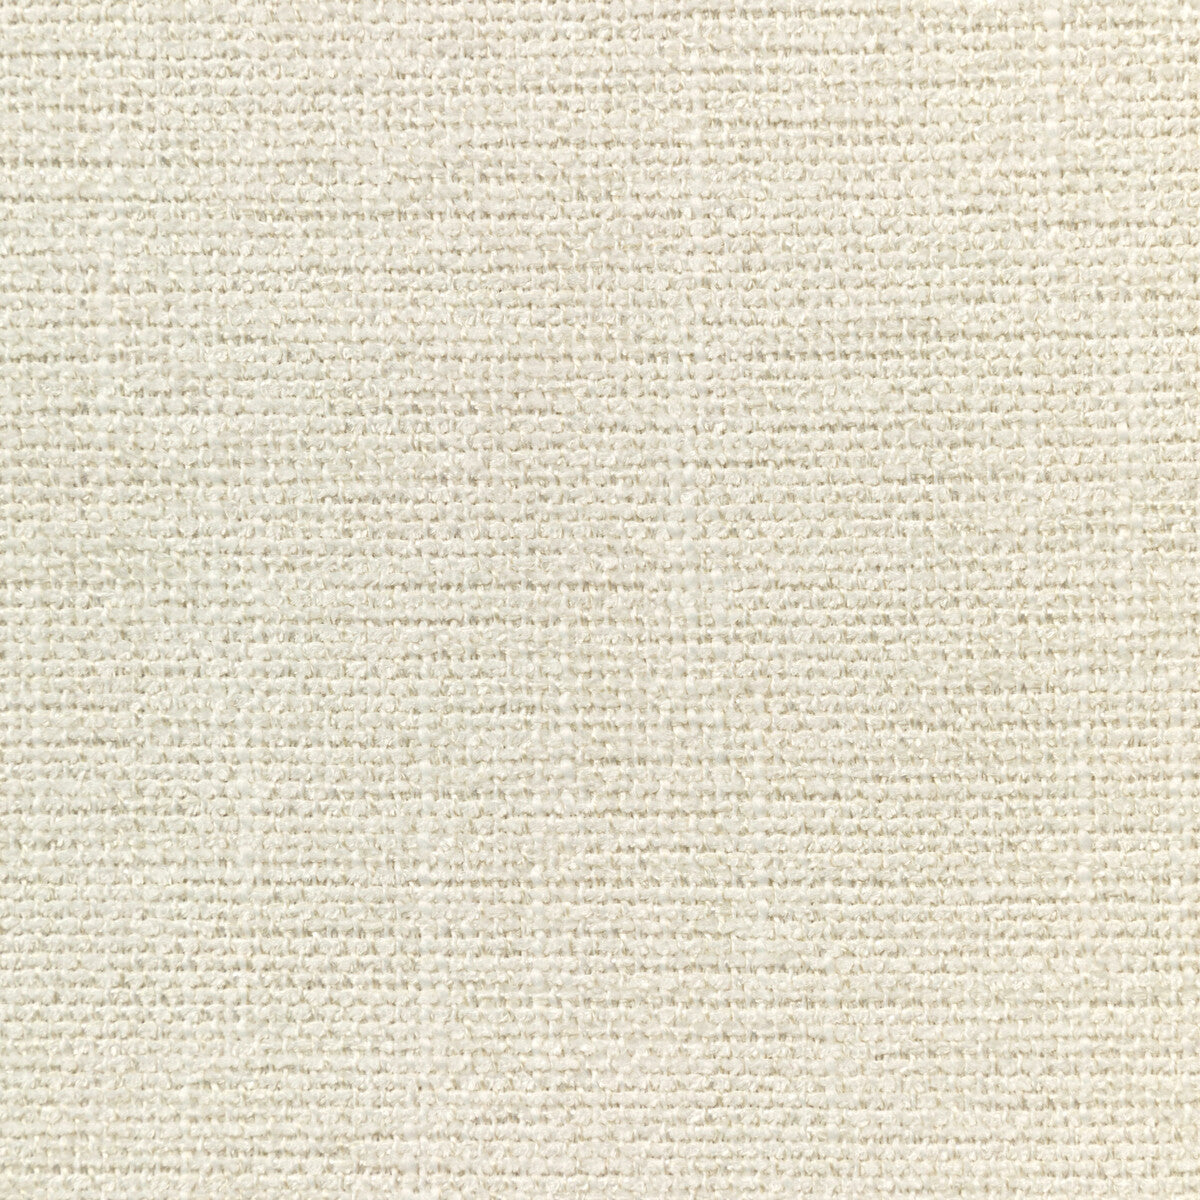 Kravet Smart fabric in 35973-101 color - pattern 35973.101.0 - by Kravet Smart in the Performance Crypton Home collection